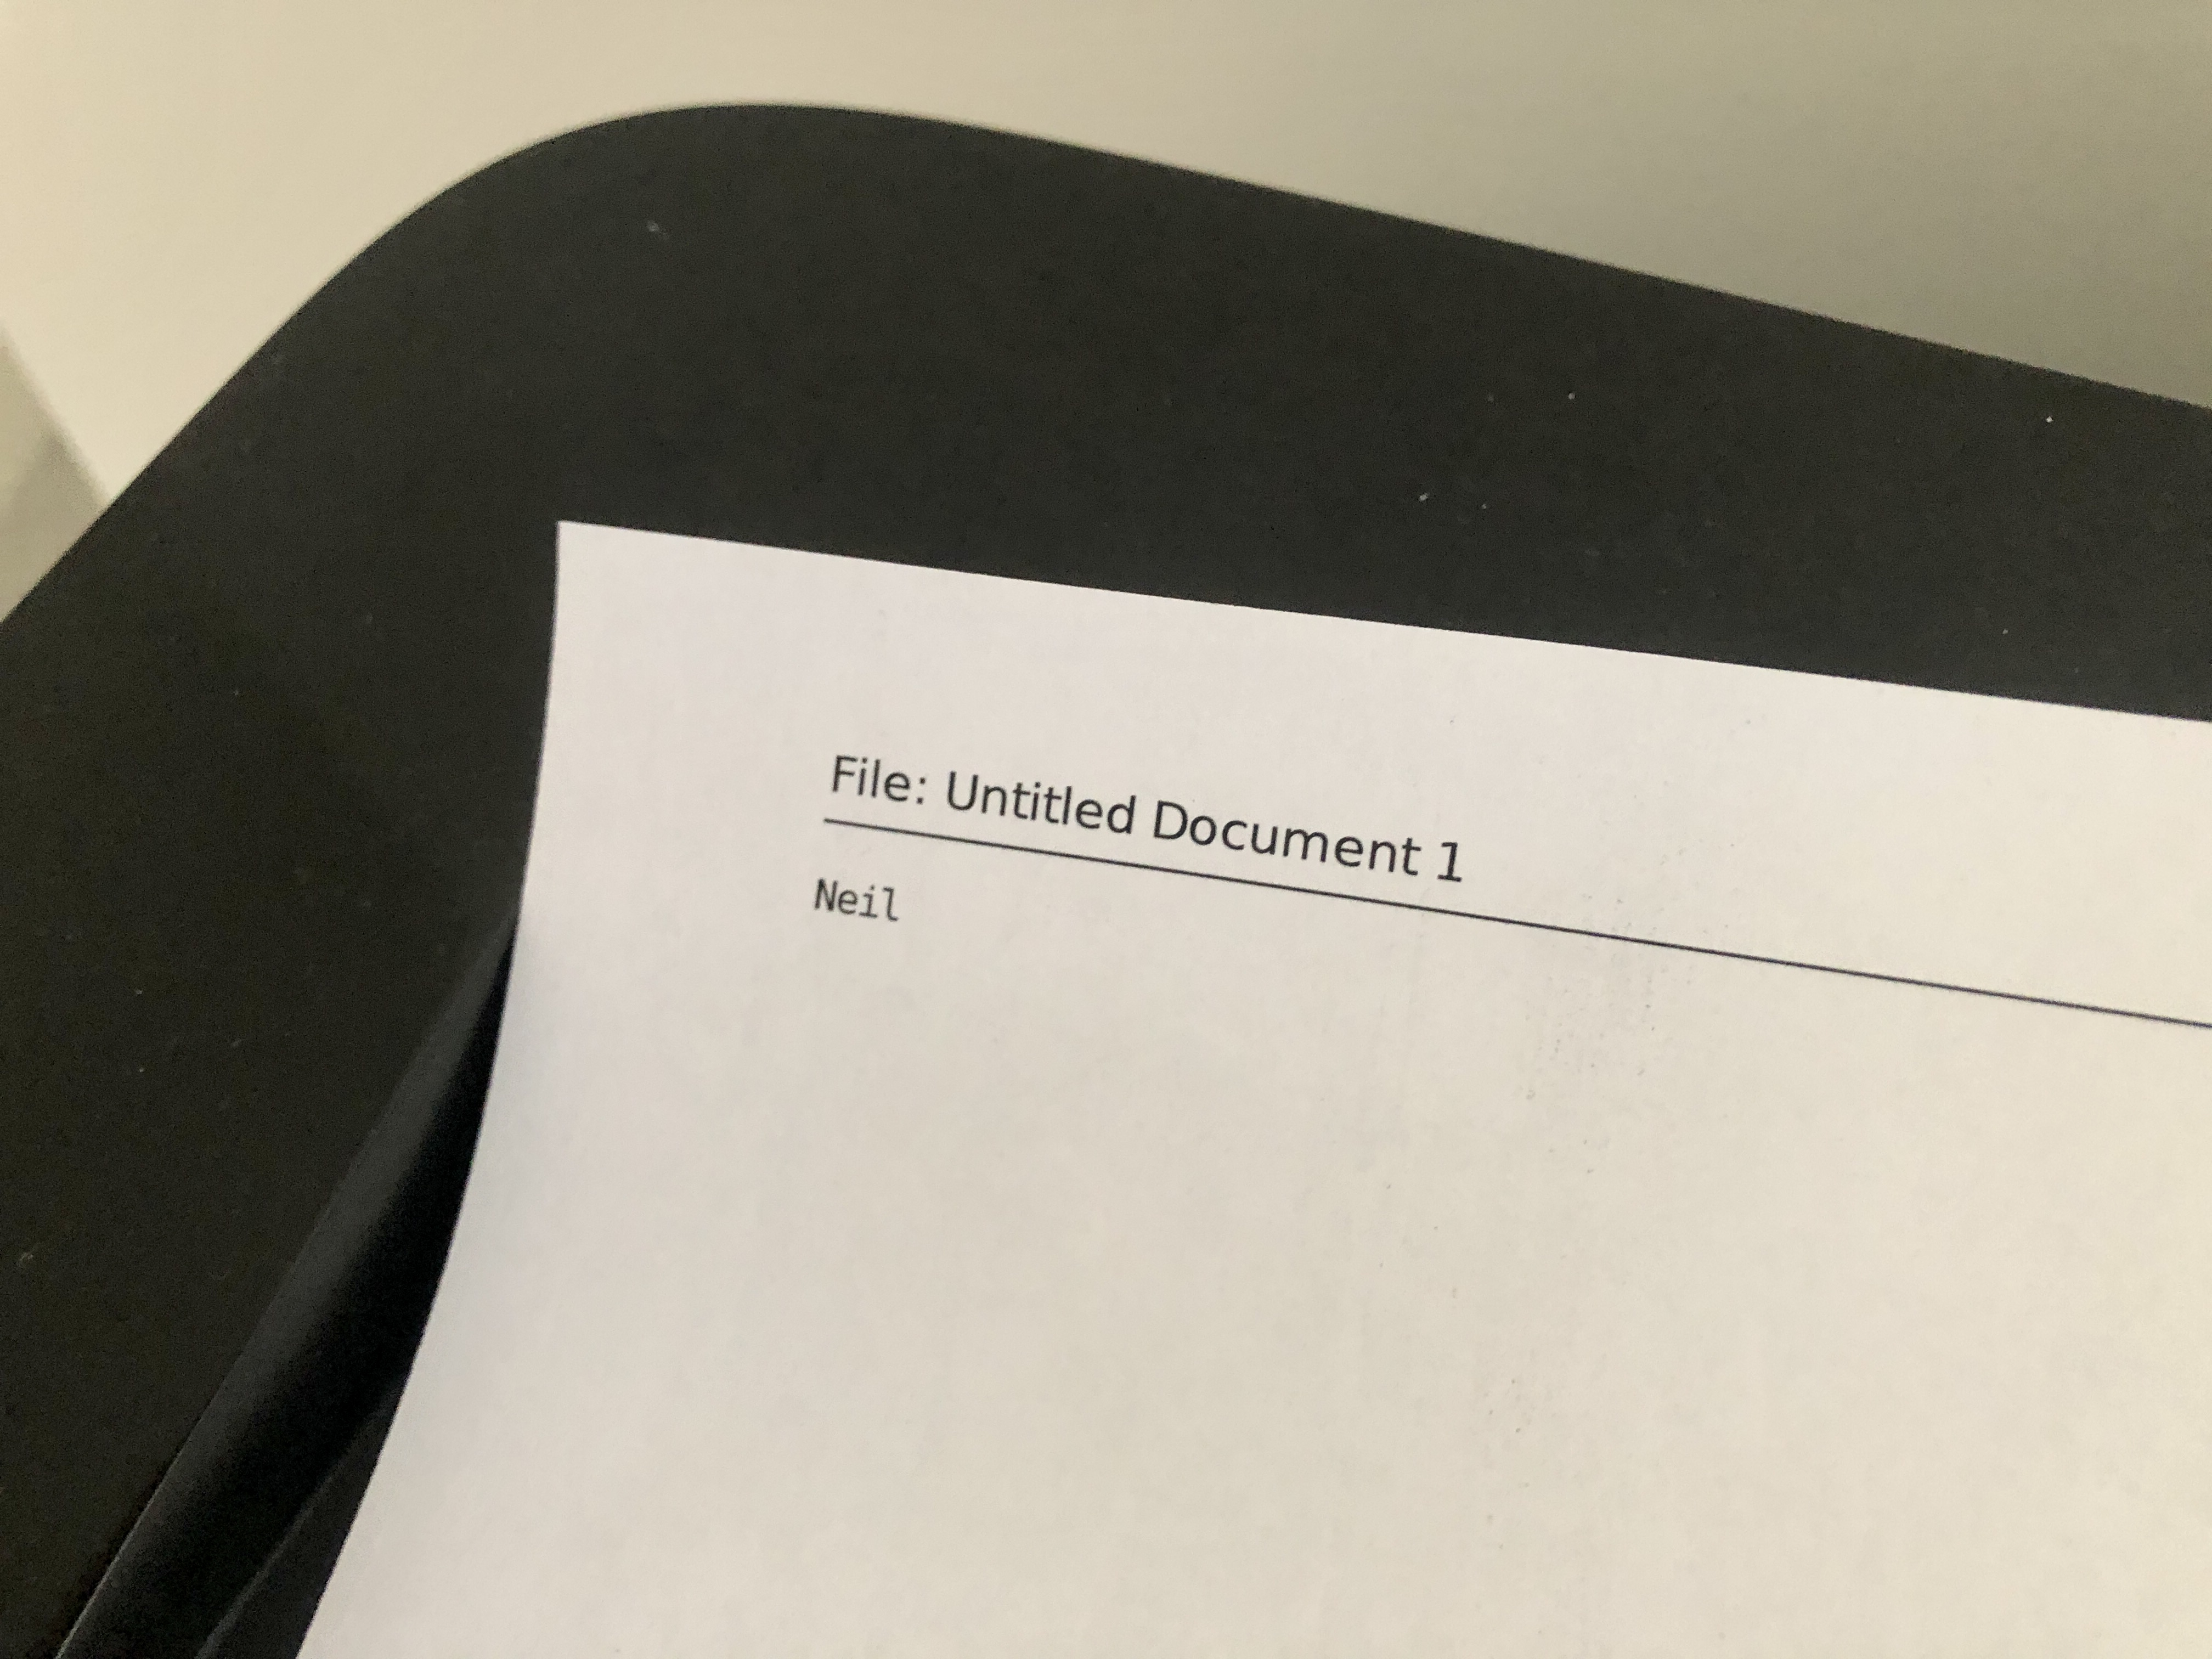 Photo of a sheet of paper on a printer, saying "Neil"